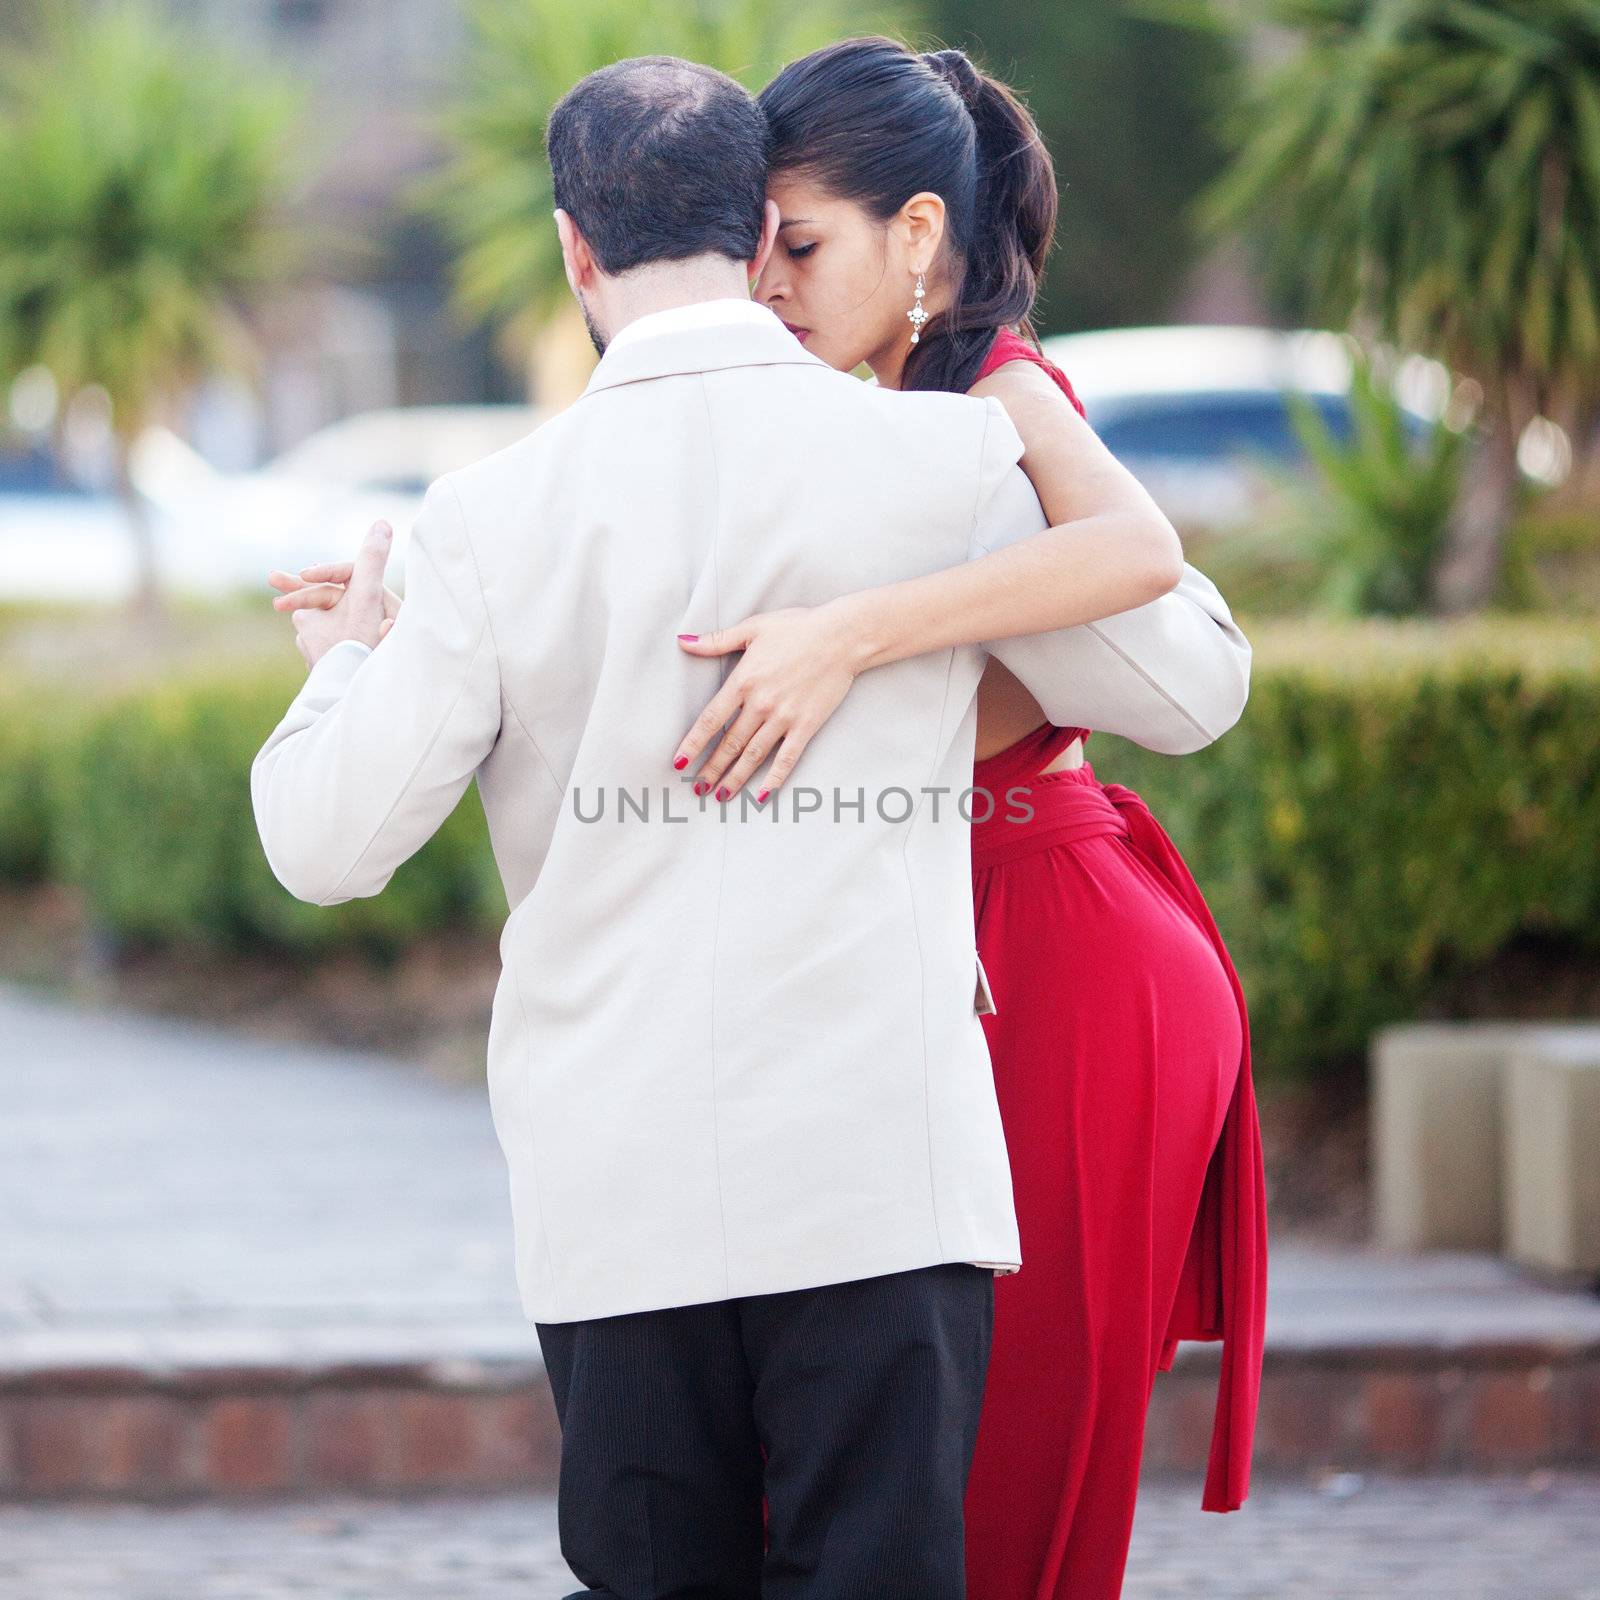 BUENOS AIRES - MAY 1: A pair of tango dancers perform on May 1,  by jannyjus